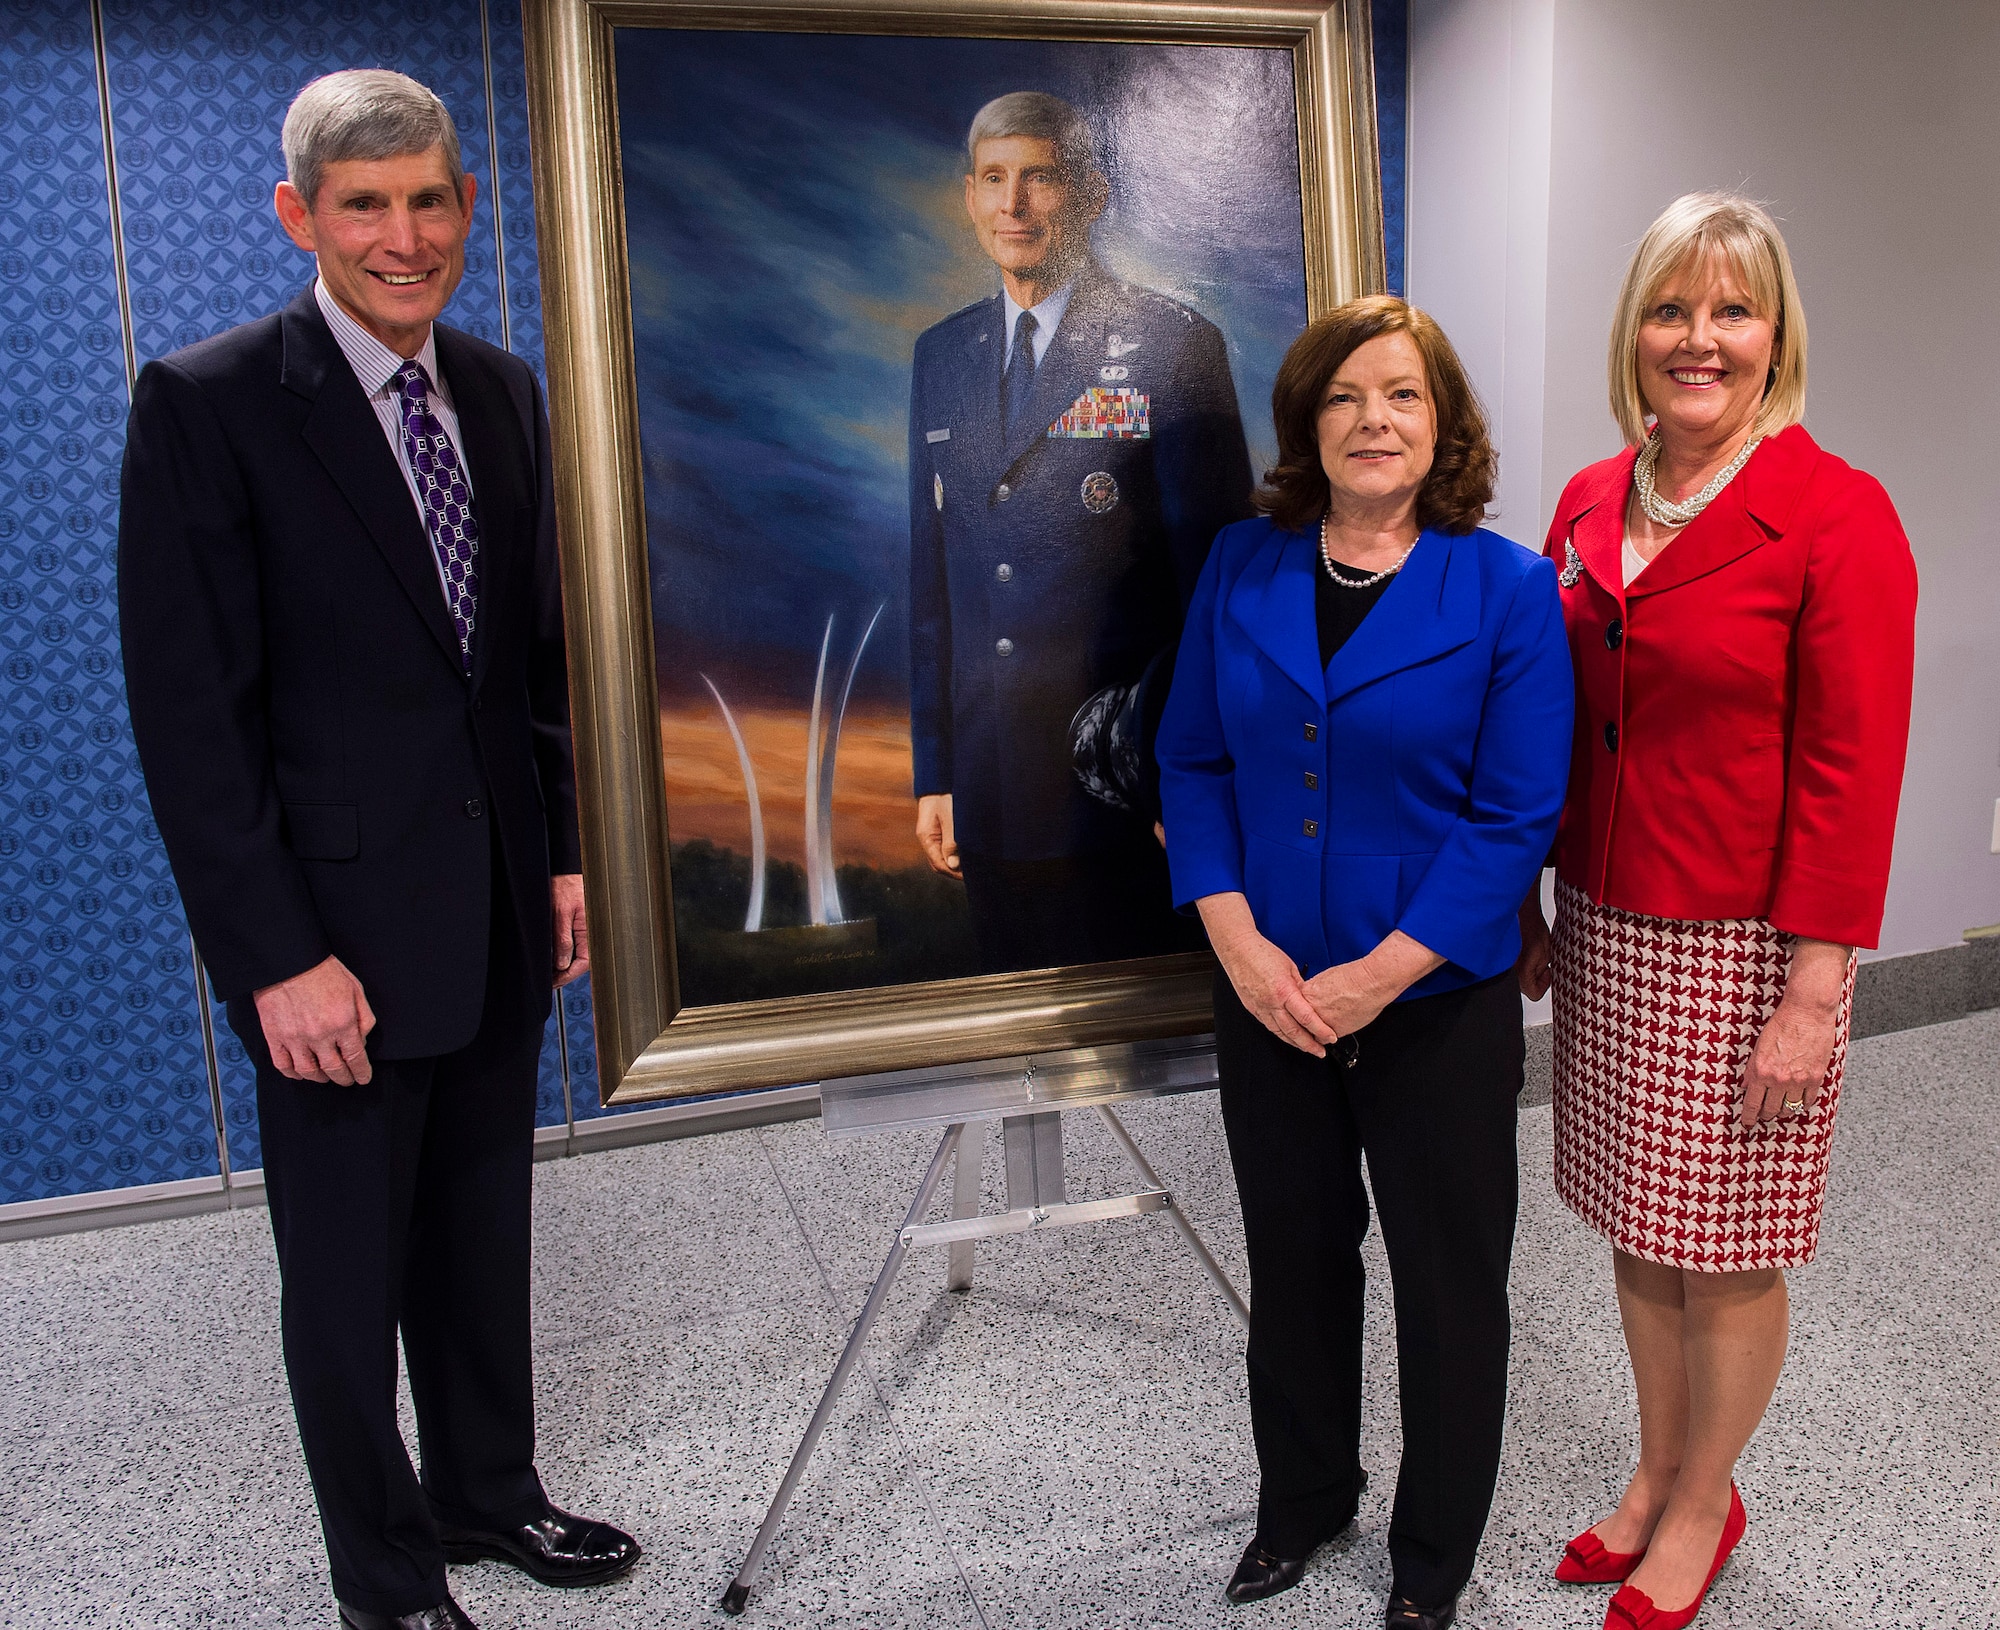 Retired Gen. Norton Schwartz, artist Michele Rushworth, and Mrs. Suzie Schwartz pose with the official portrait of the former Air Force chief of staff following its unveiling in the Pentagon, Washington, D.C., on Jan. 8, 2013. The portrait will be on display in the Pentagon's Arnold Corridor. (U.S. Air Force photo/Jim Varhegyi)